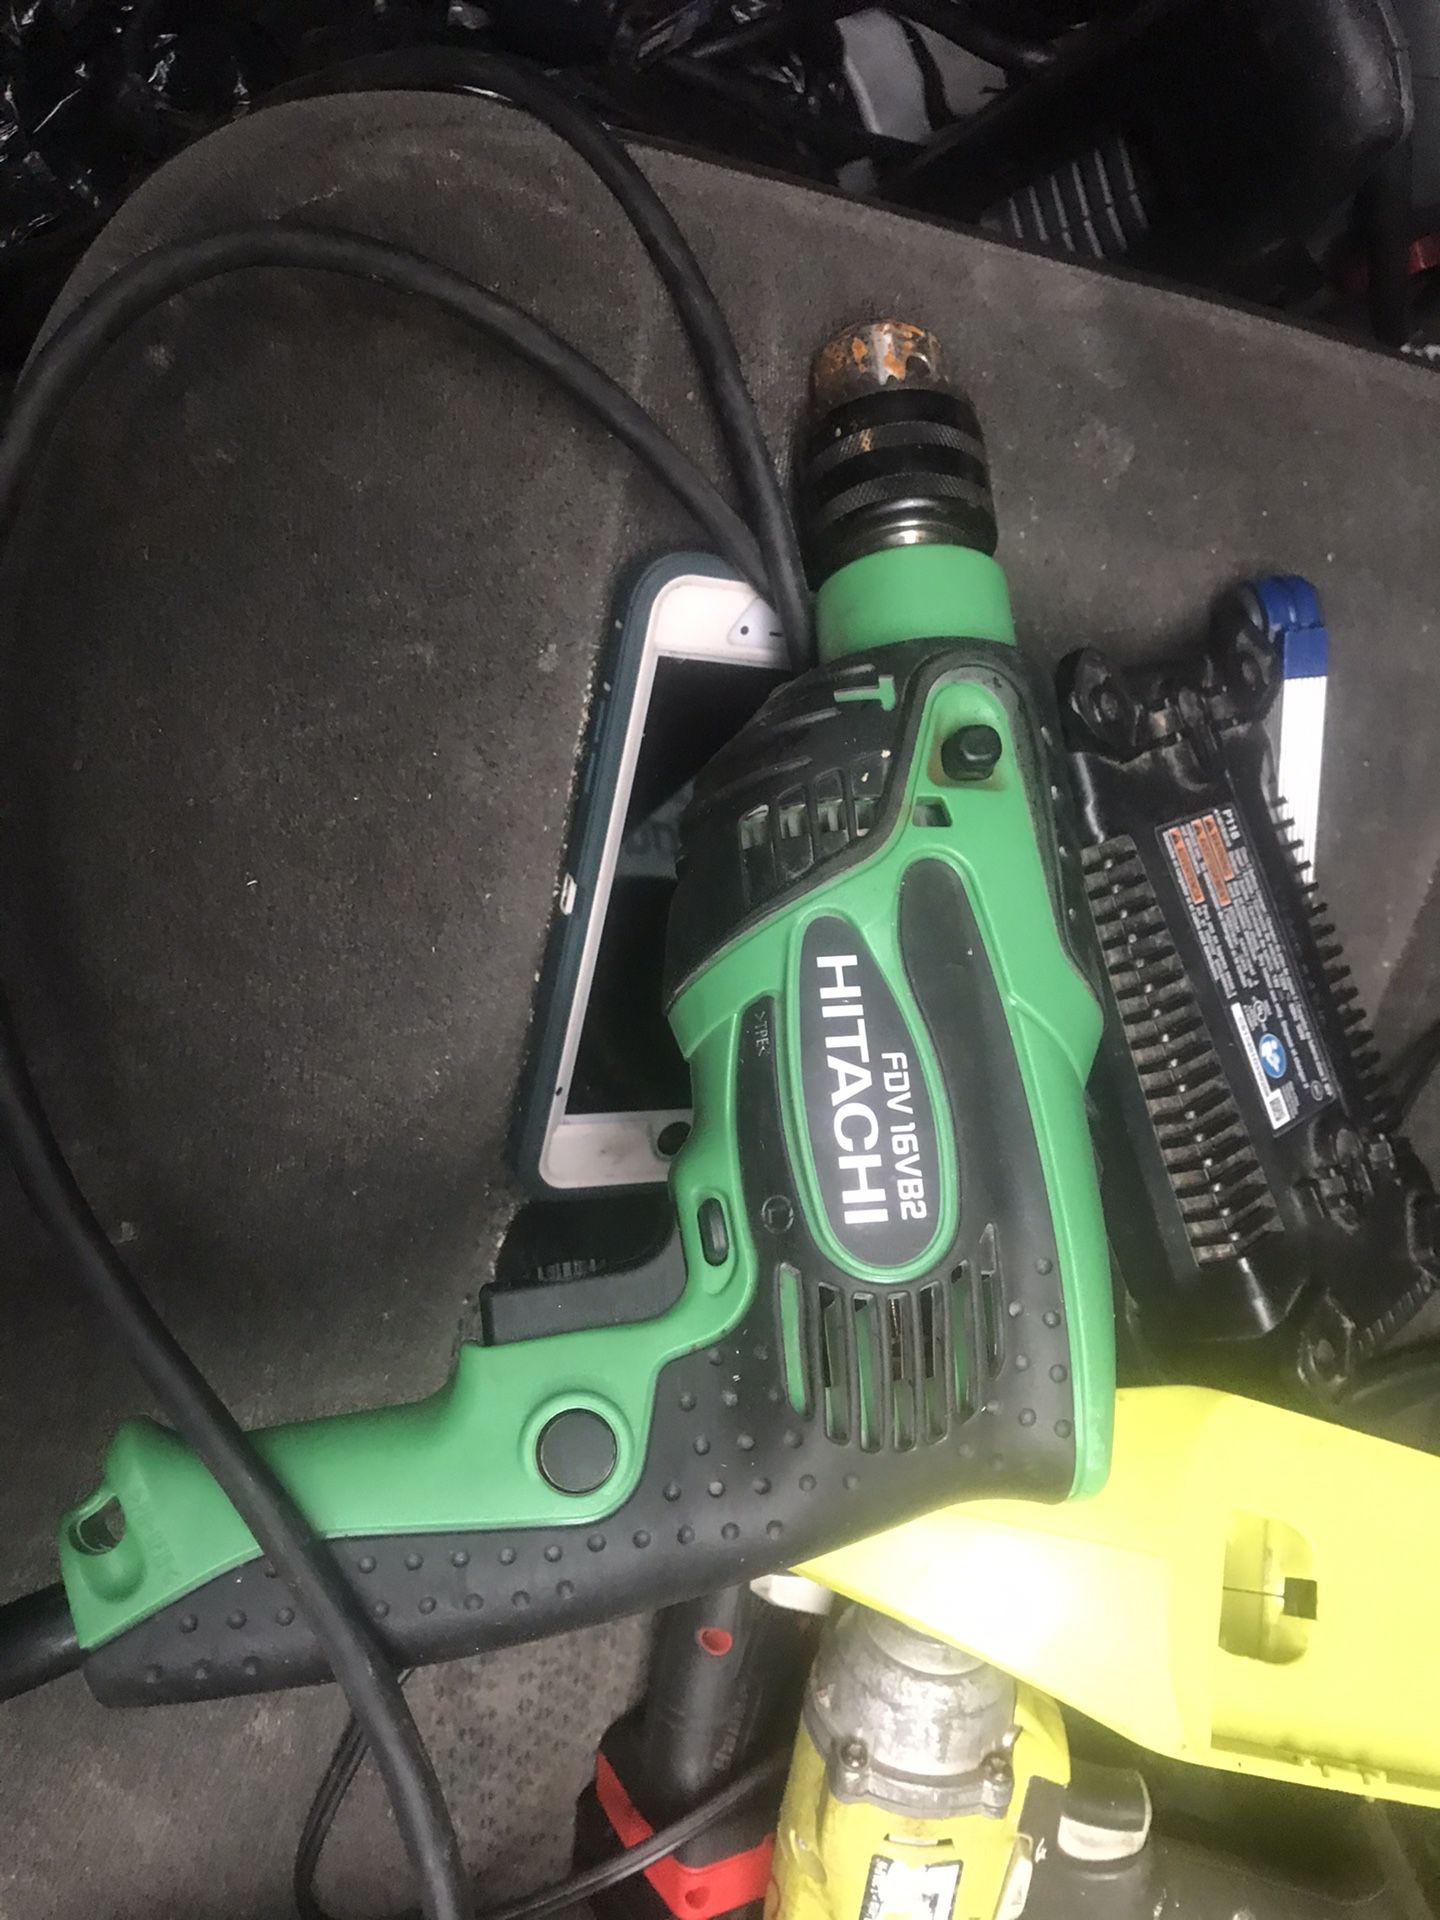 Like new power drill hitachi is the brand name $30